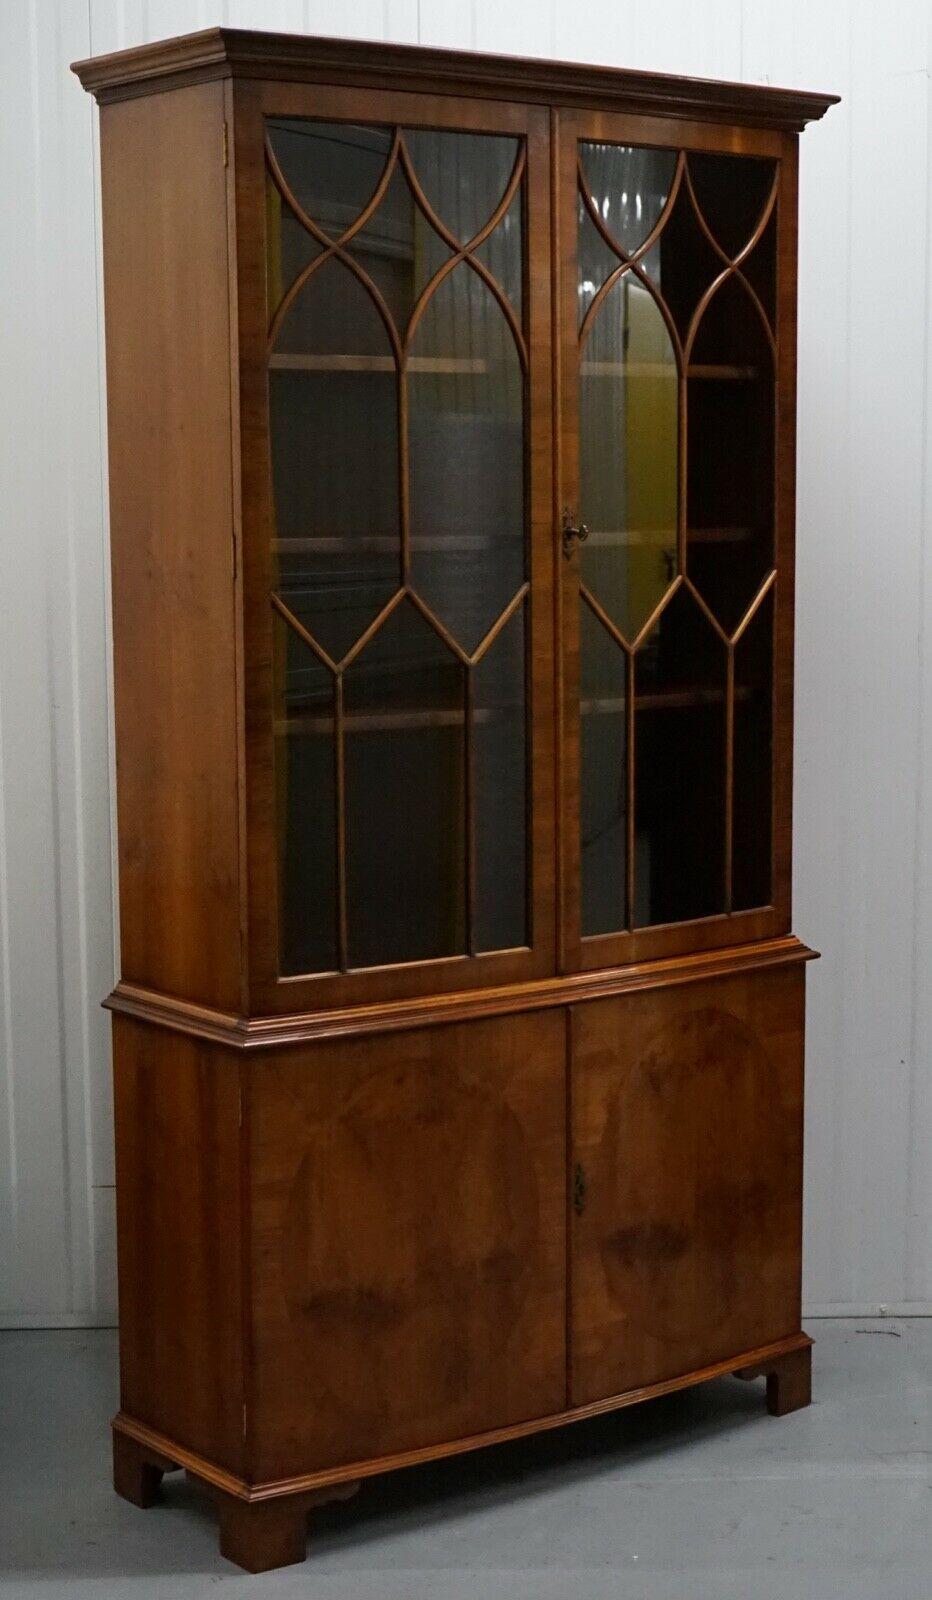 British Beautiful Vintage Burr Yew Wood Display Cabinet with Shelves